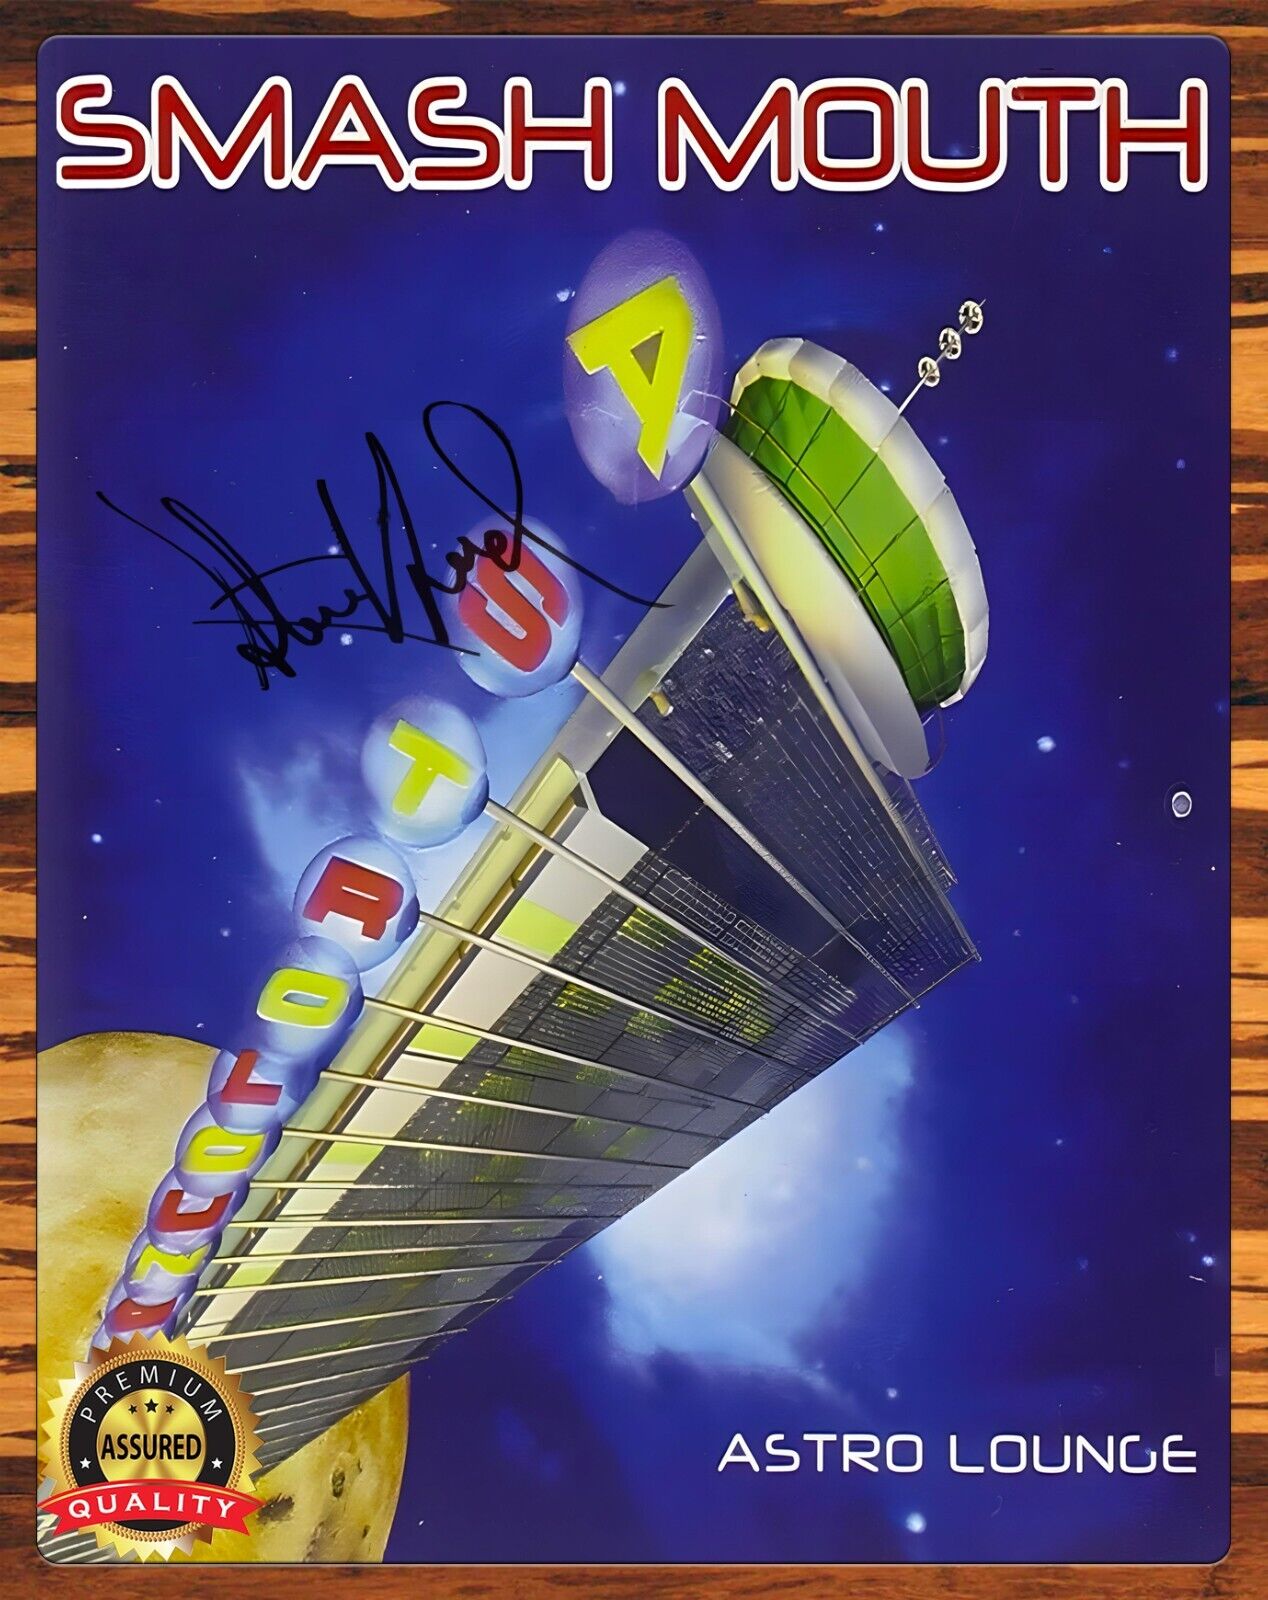 Smash Mouth - Astro Lounge - Signed Reprint Steve Harwell - Metal Sign 11 x 14